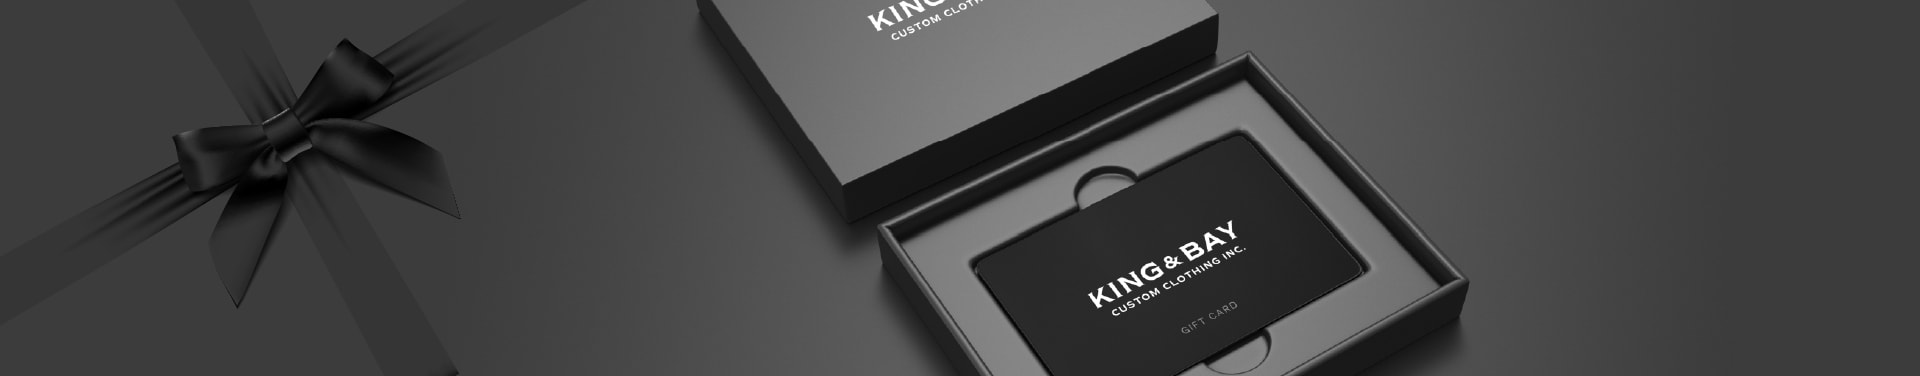 Purchase a King & Bay Custom Clothing Gift Card